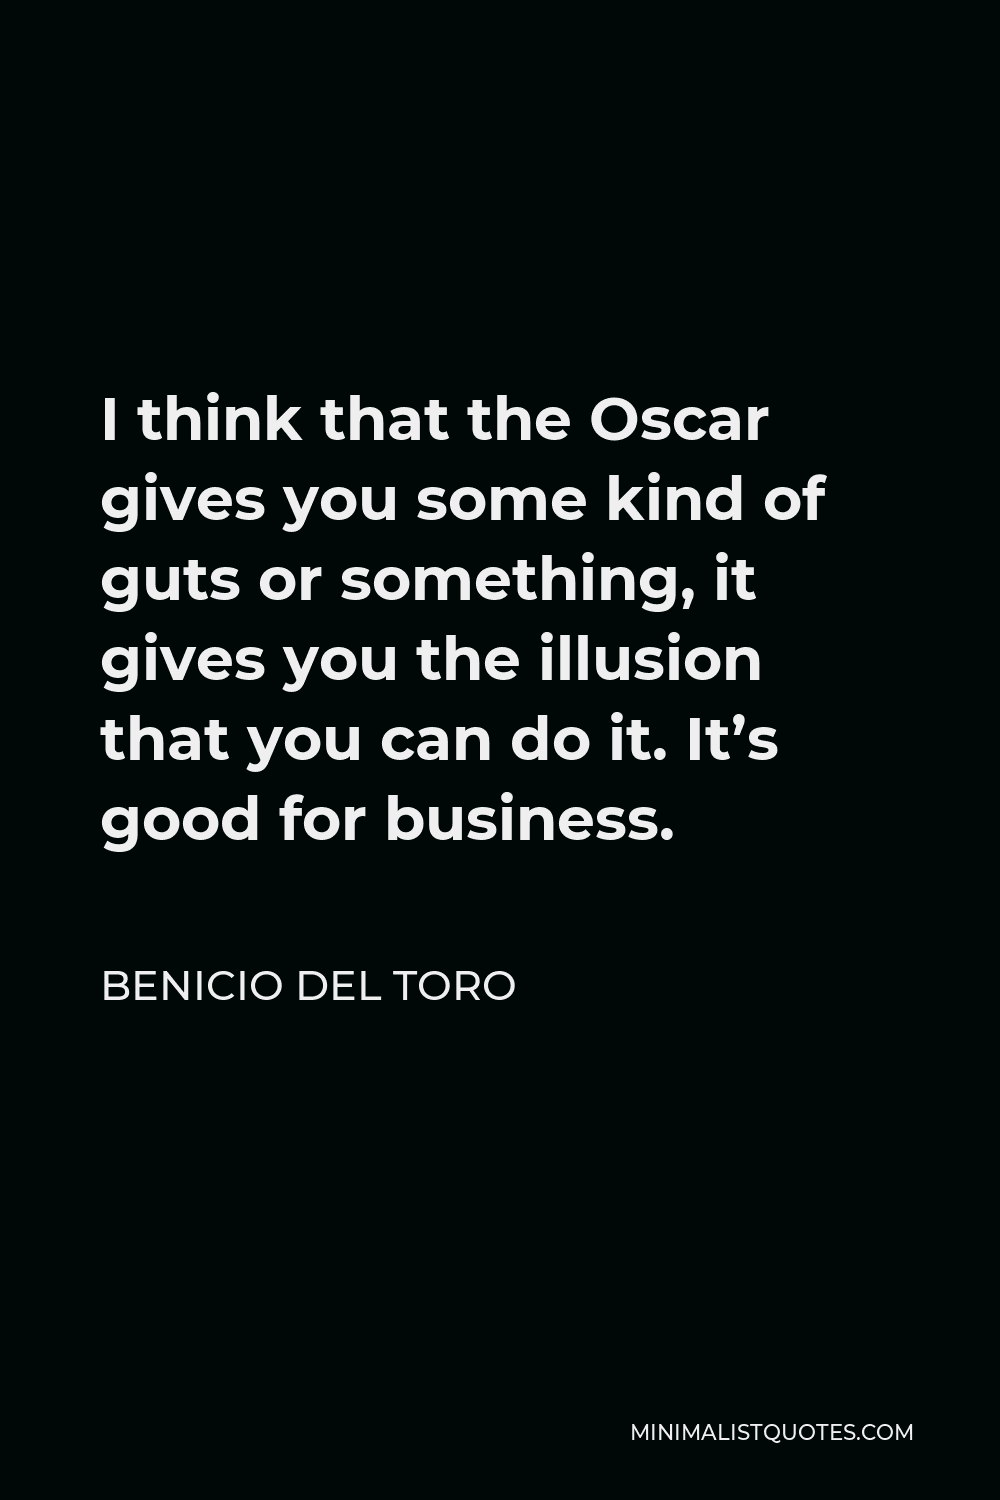 Benicio Del Toro Quote - I think that the Oscar gives you some kind of guts or something, it gives you the illusion that you can do it. It’s good for business.